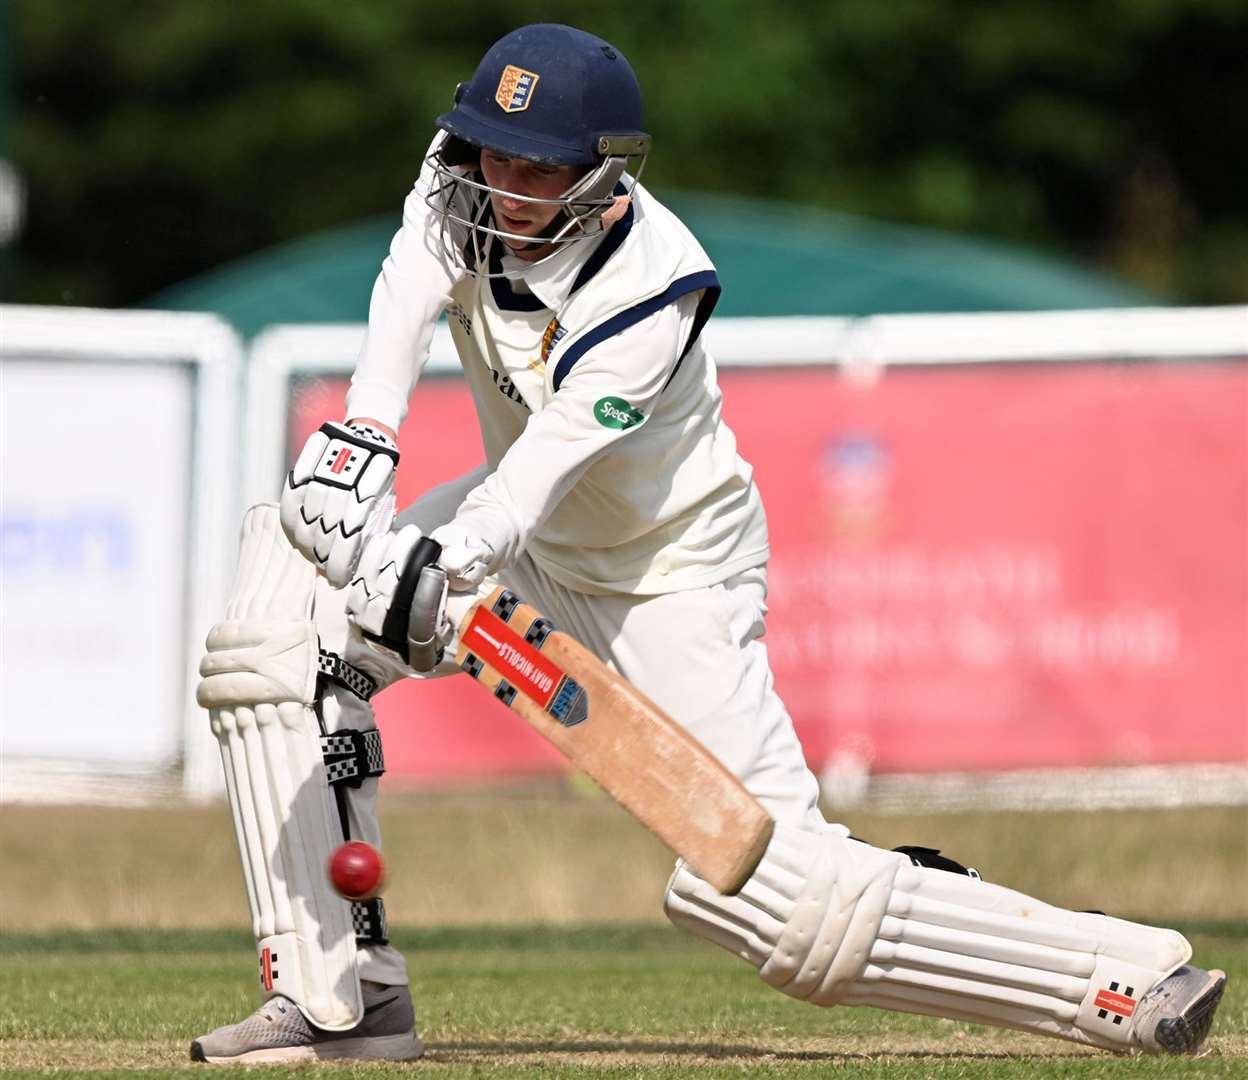 Ben Chapman - scored a half-century in a losing cause for Sandwich Town against Canterbury at the weekend. Picture: Keith Gillard